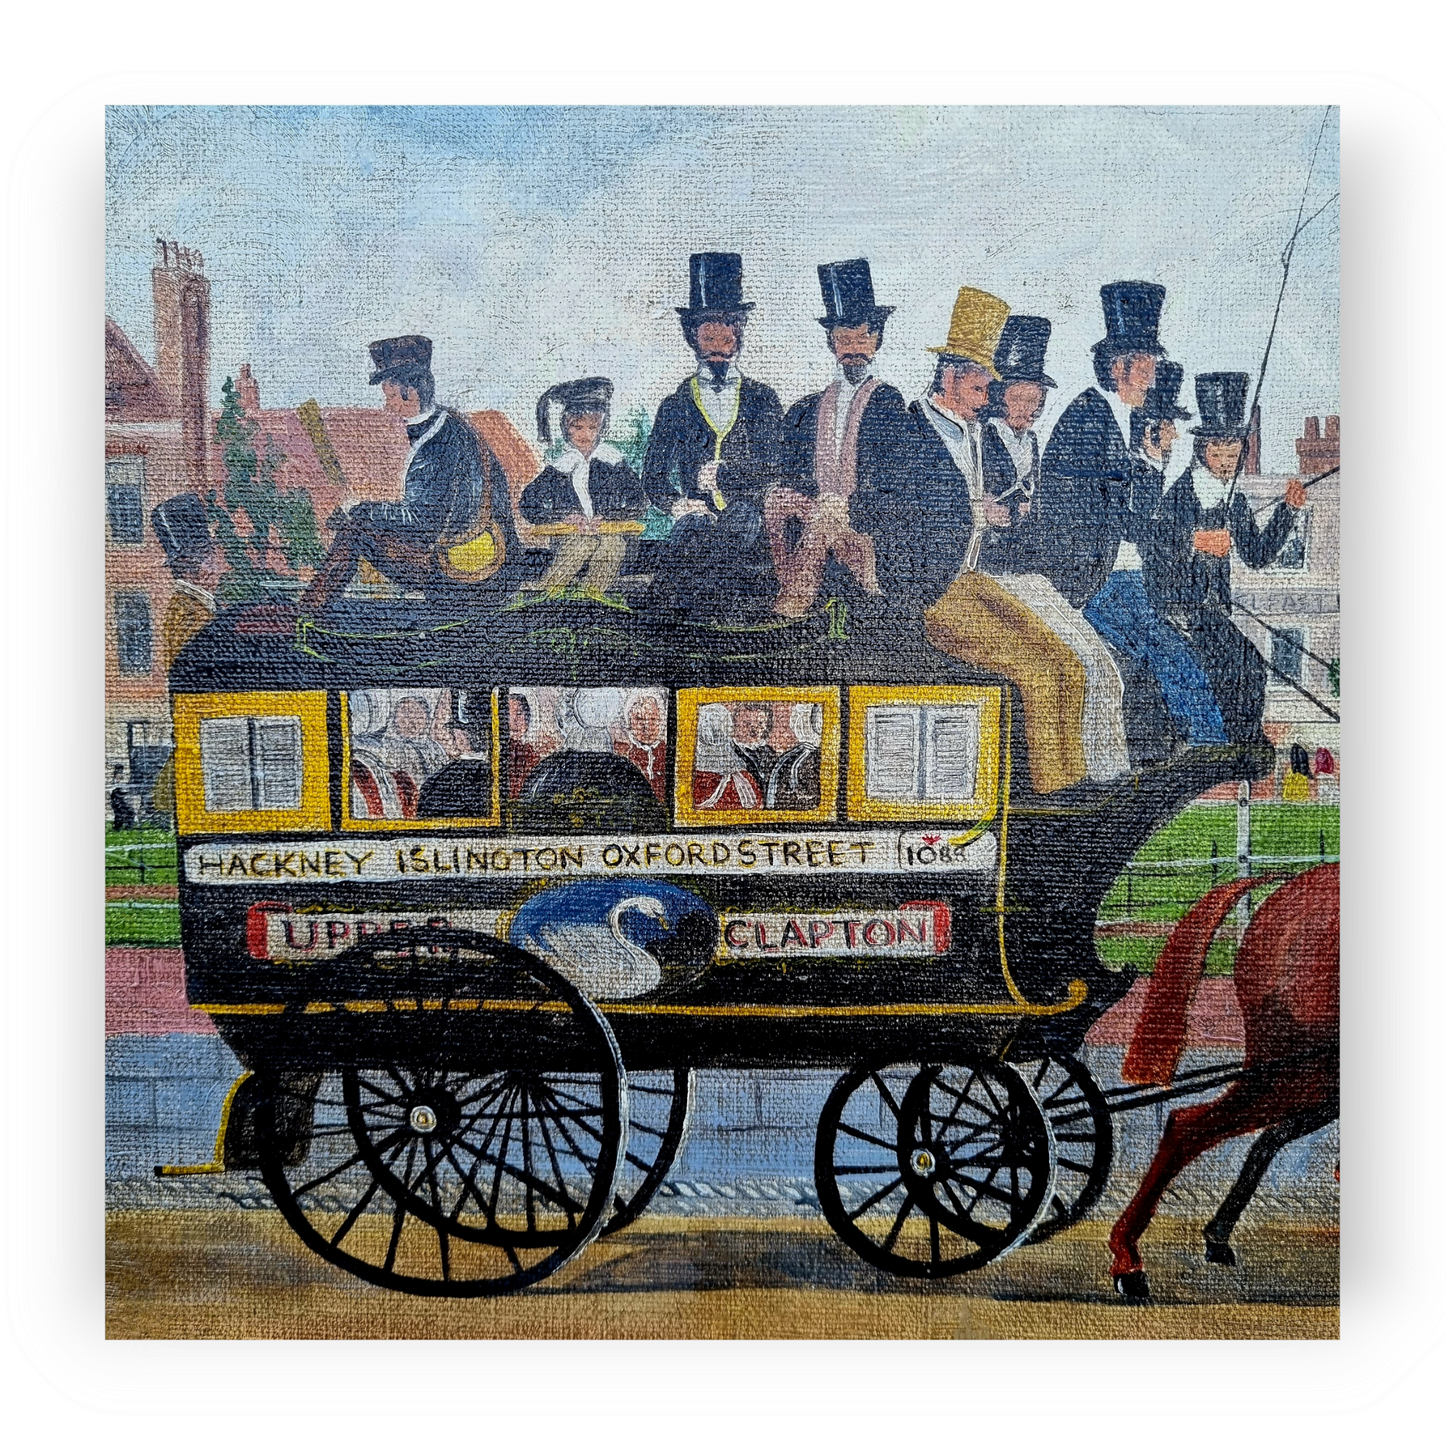 Naive Late 19th Century English School Antique Oil On Canvas Of A London-Based Horse Drawn Bus / Horse-Bus Or Omnibus